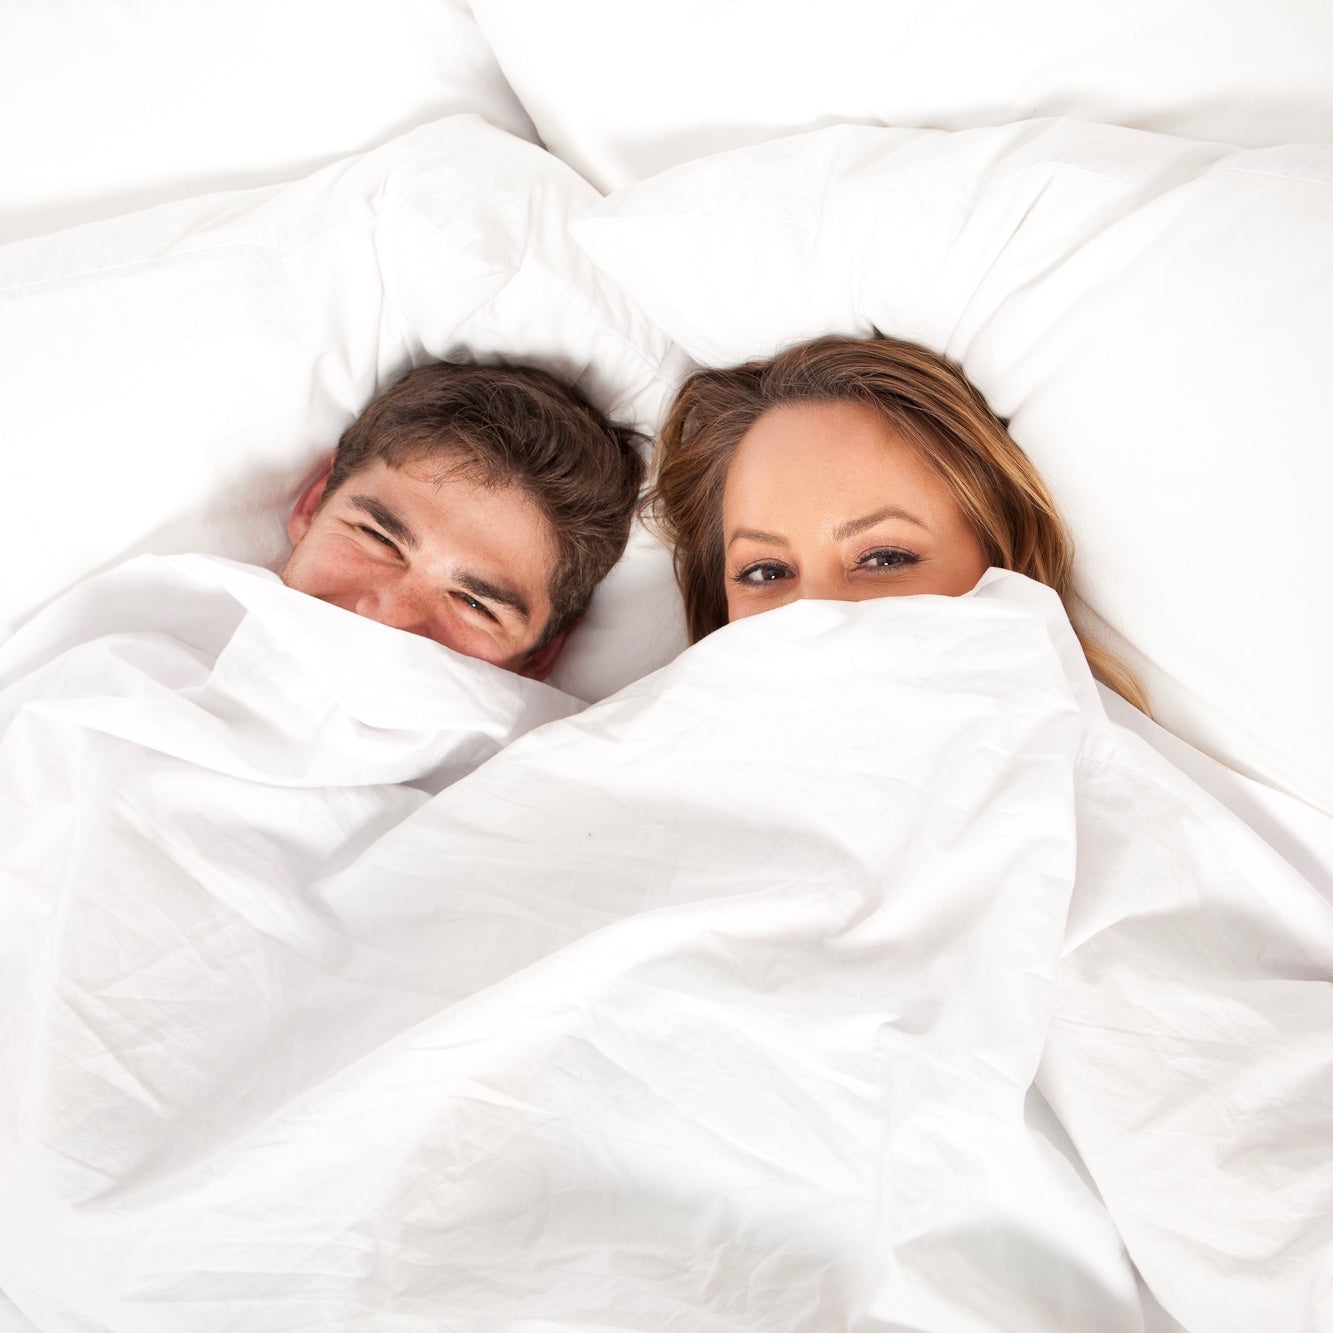 6 reasons why bedding makes a great wedding gift